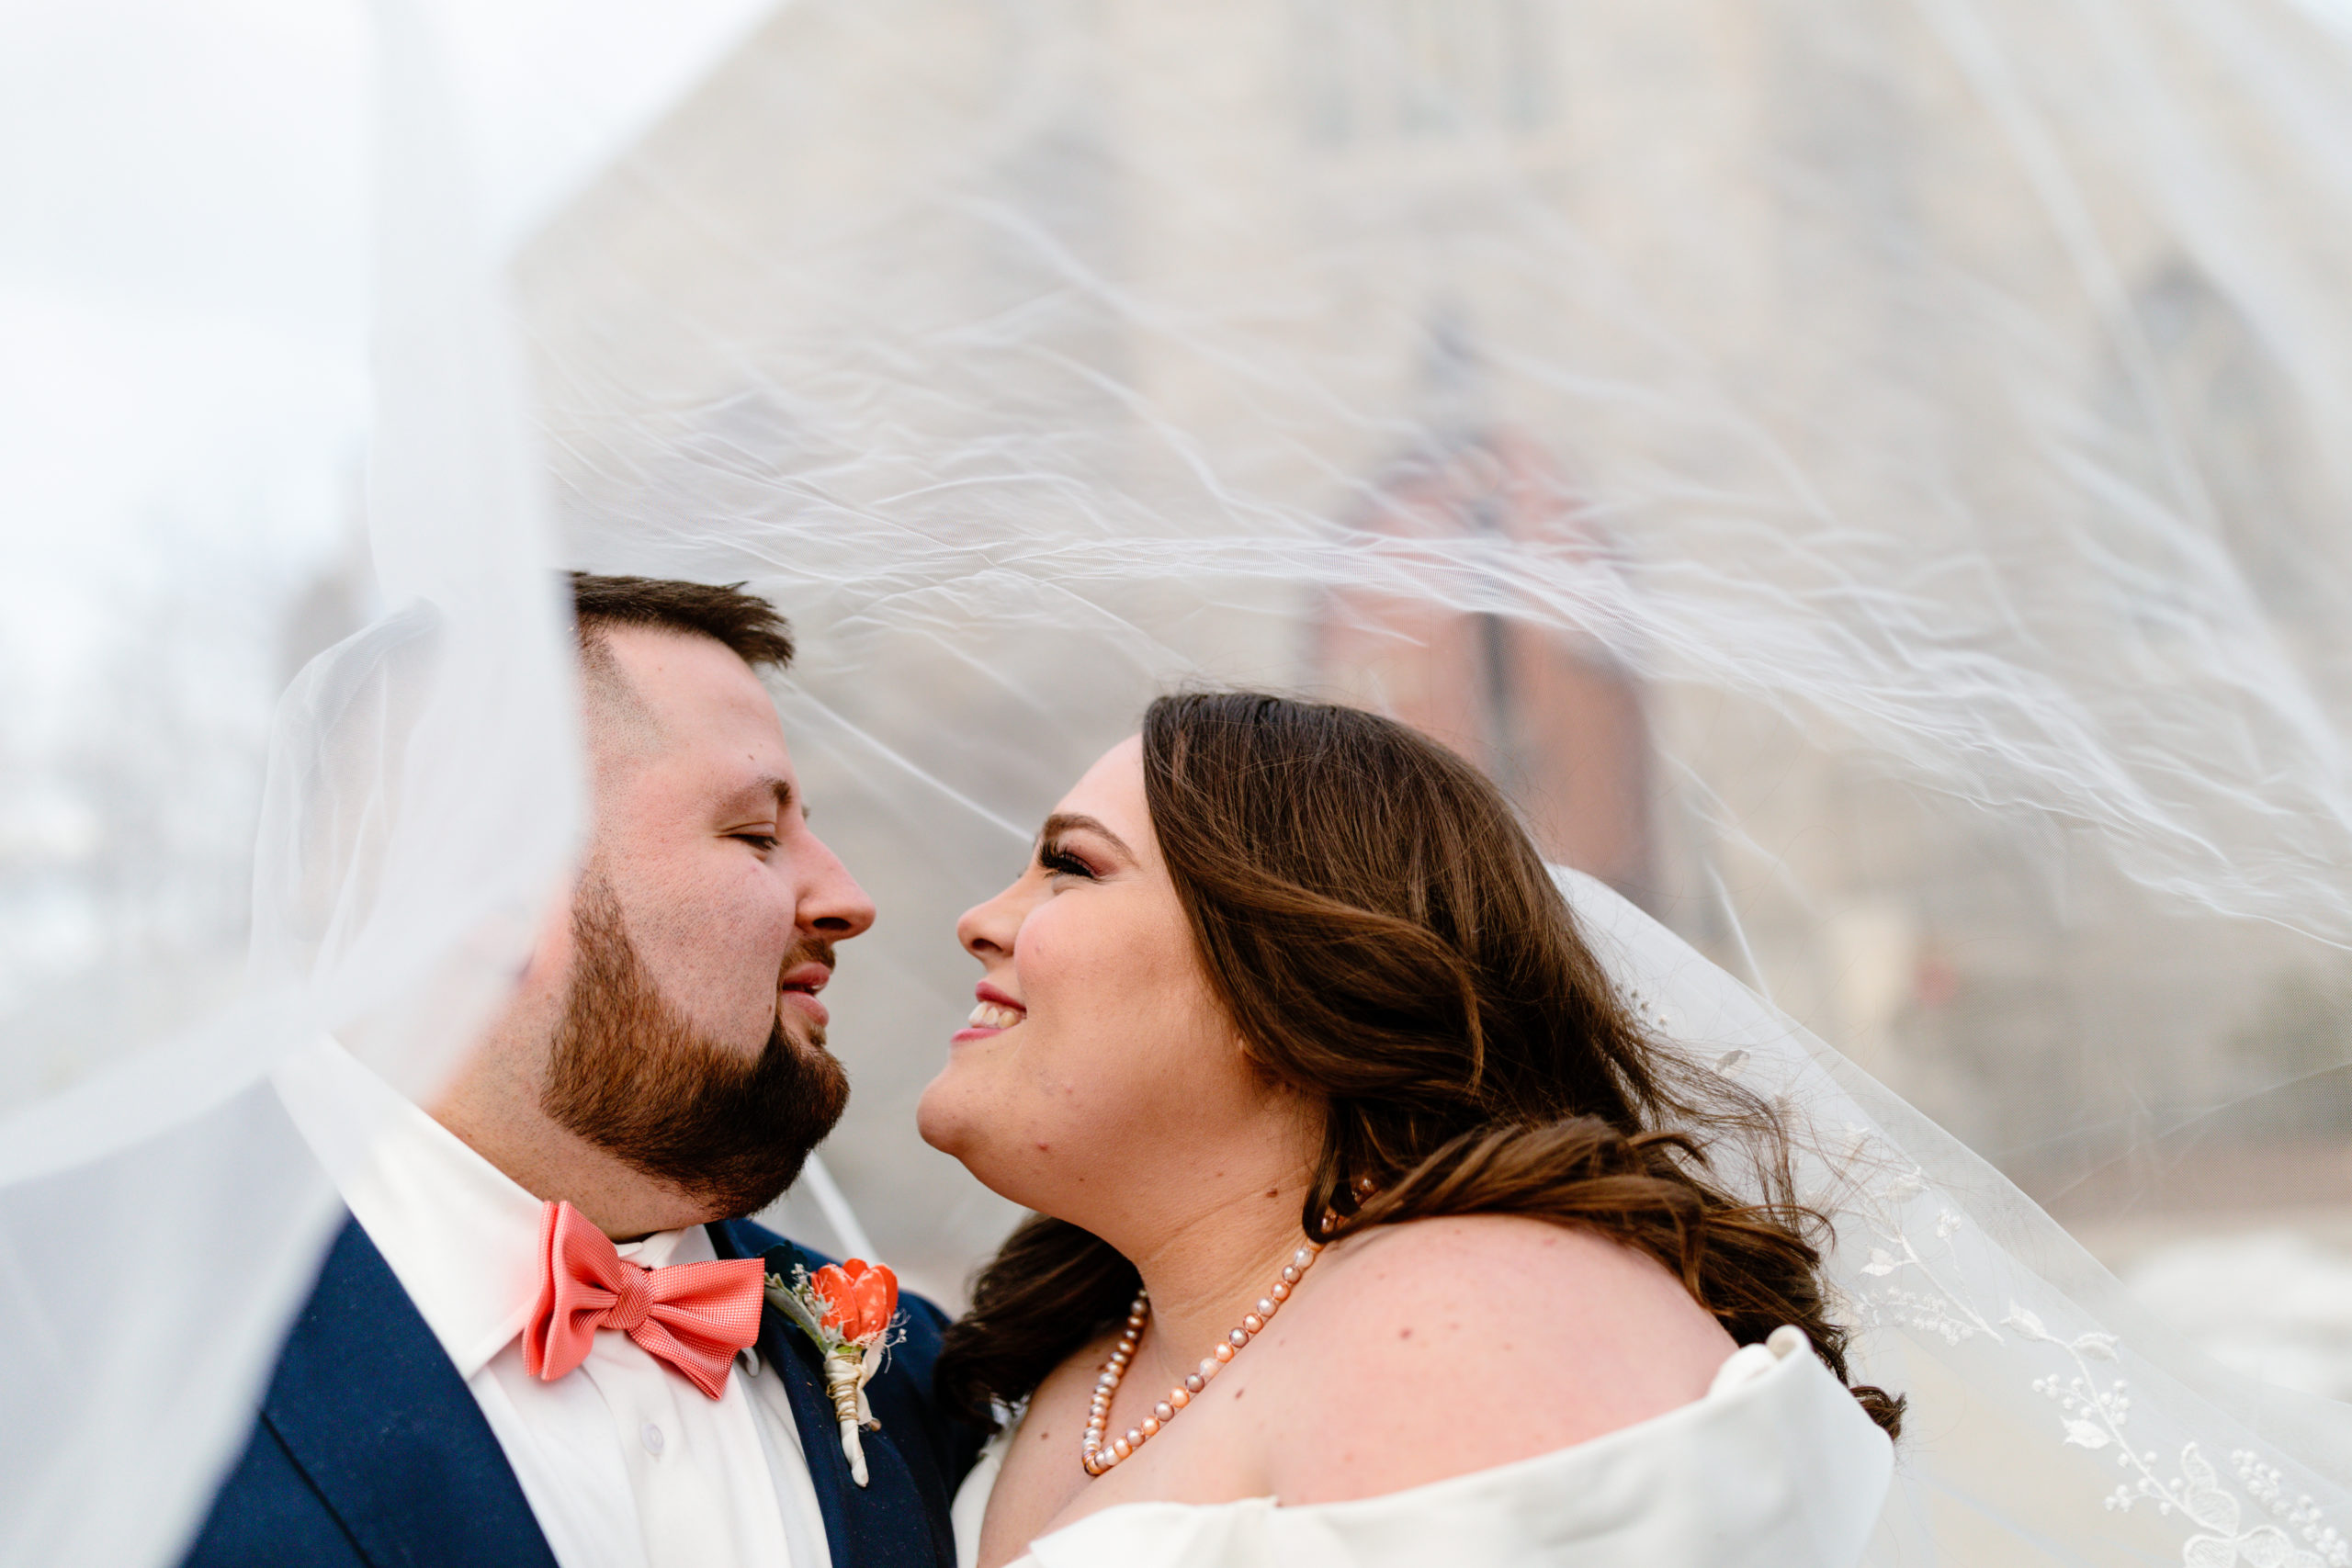 Bride and Groom Portrait at Holy Trinity Church, Concord, NH